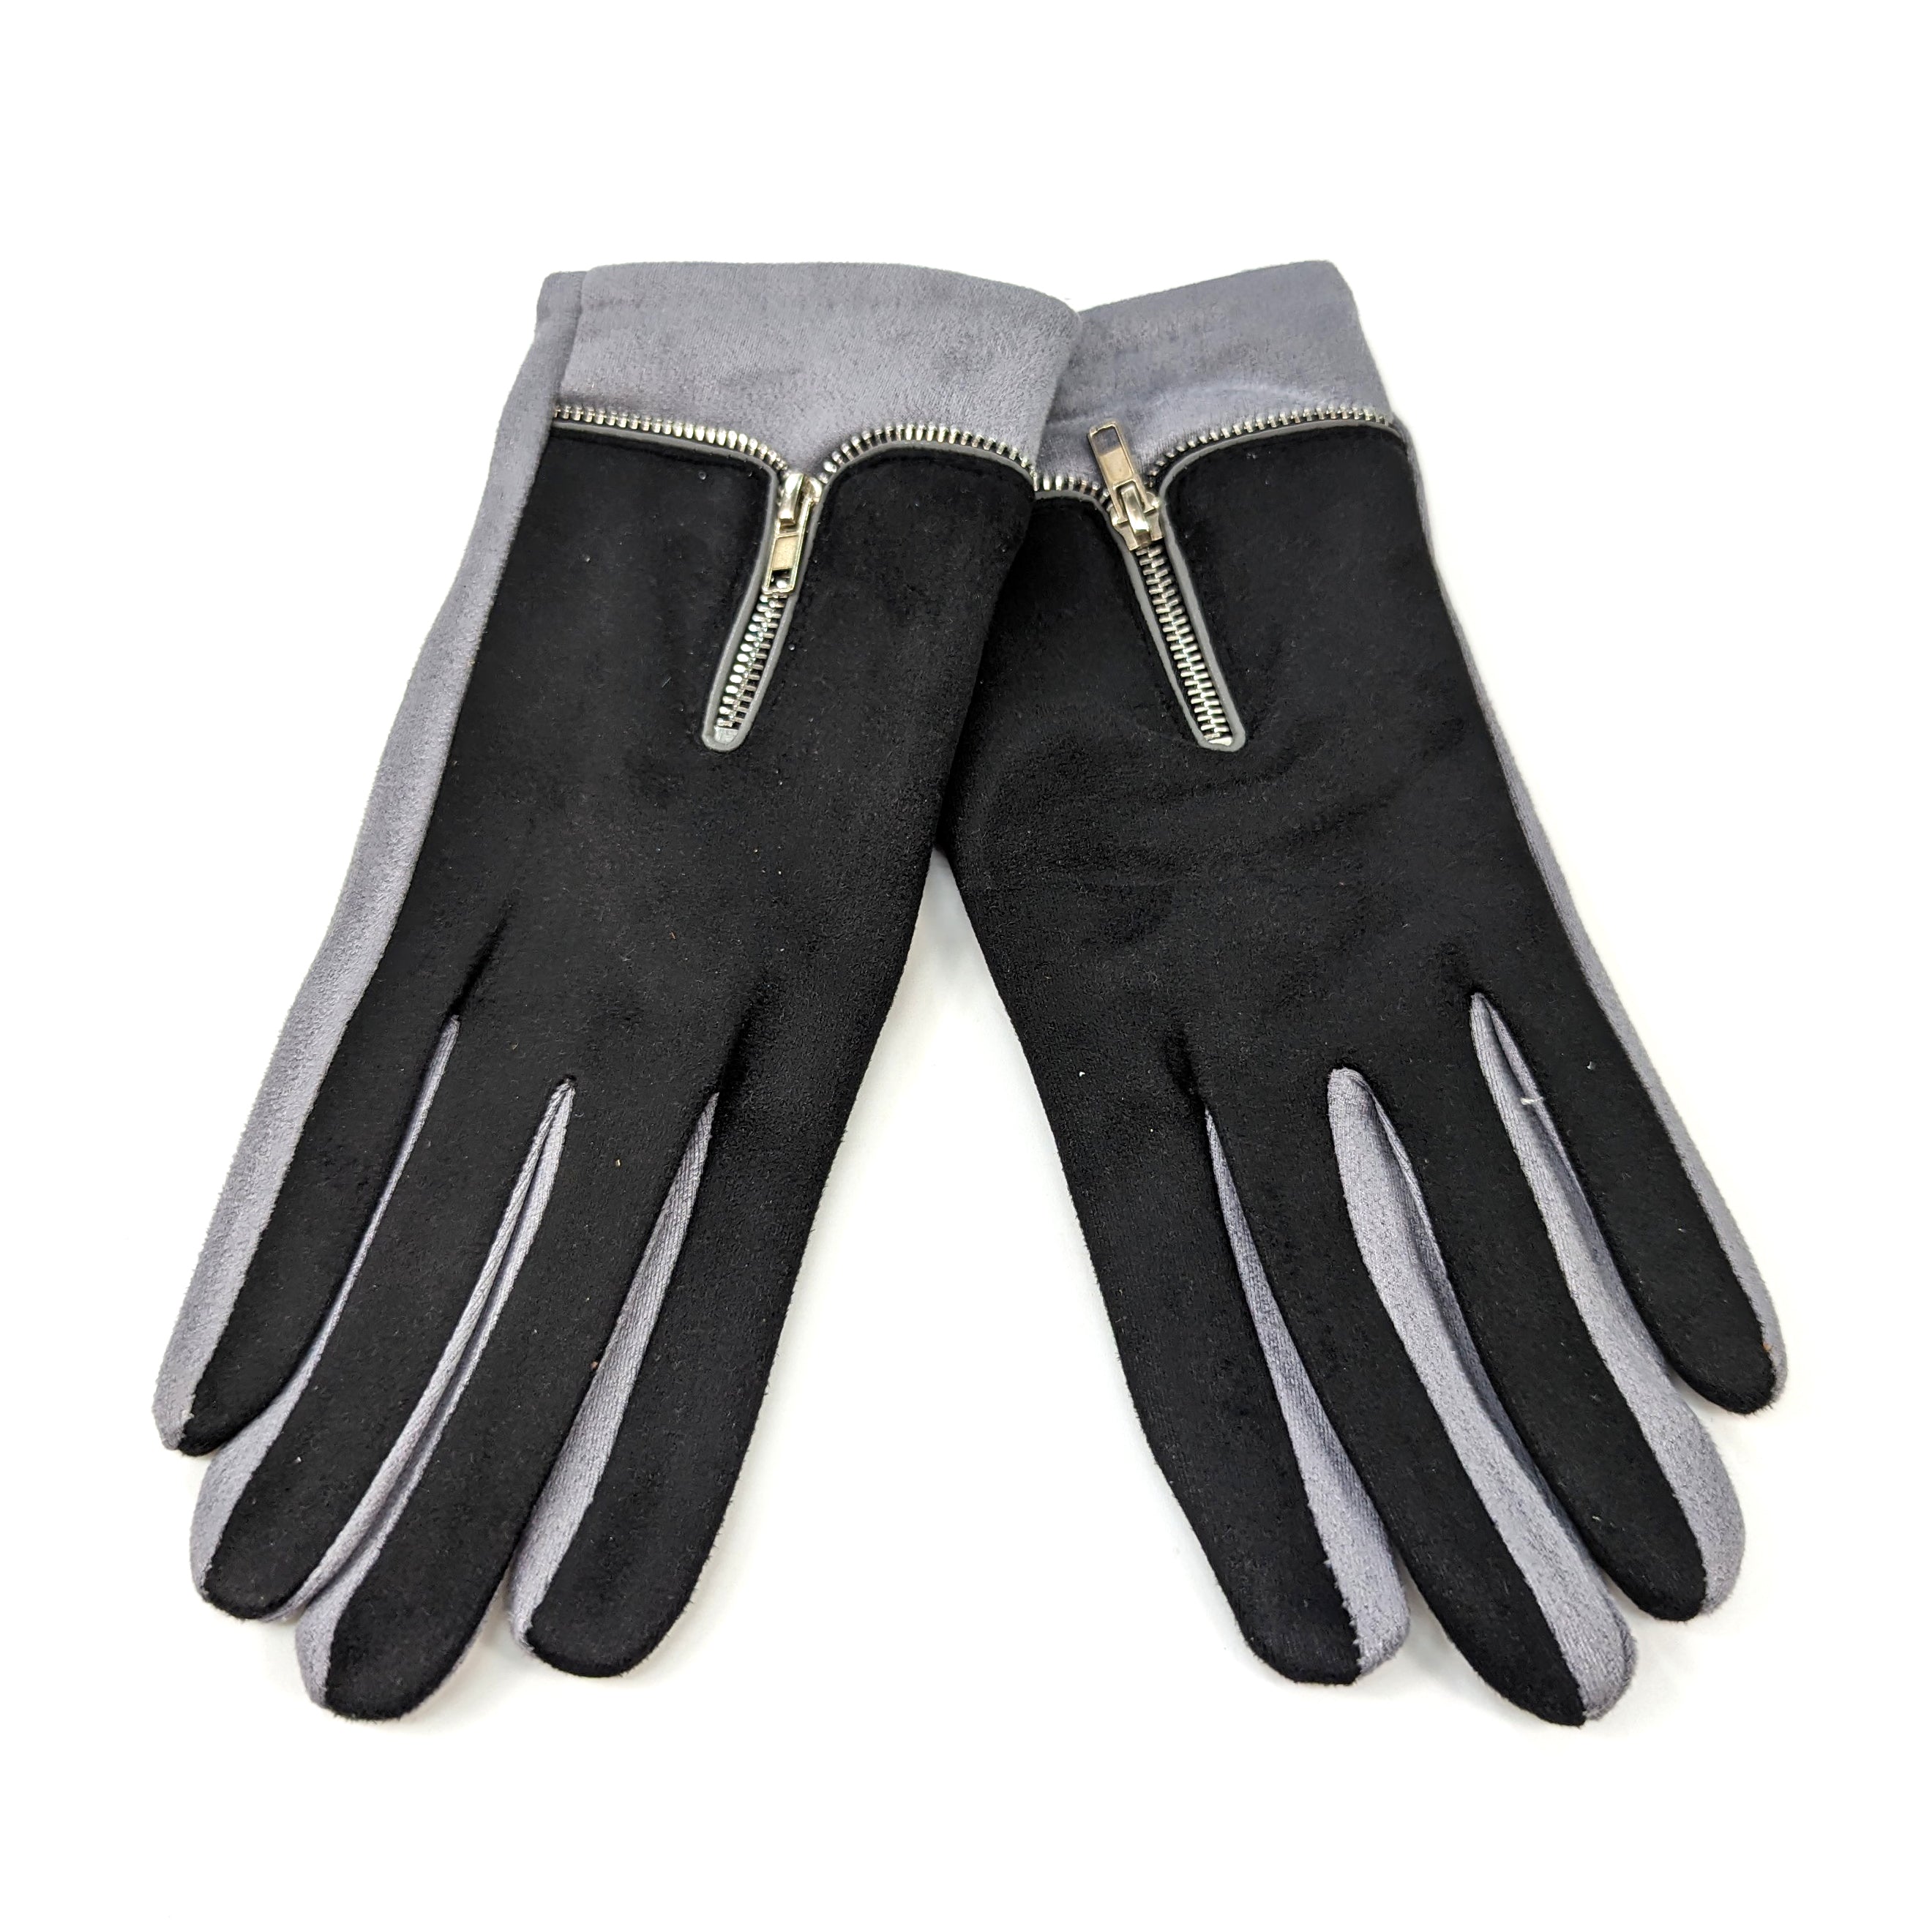 Gloves with a Zip Details - Black / Grey